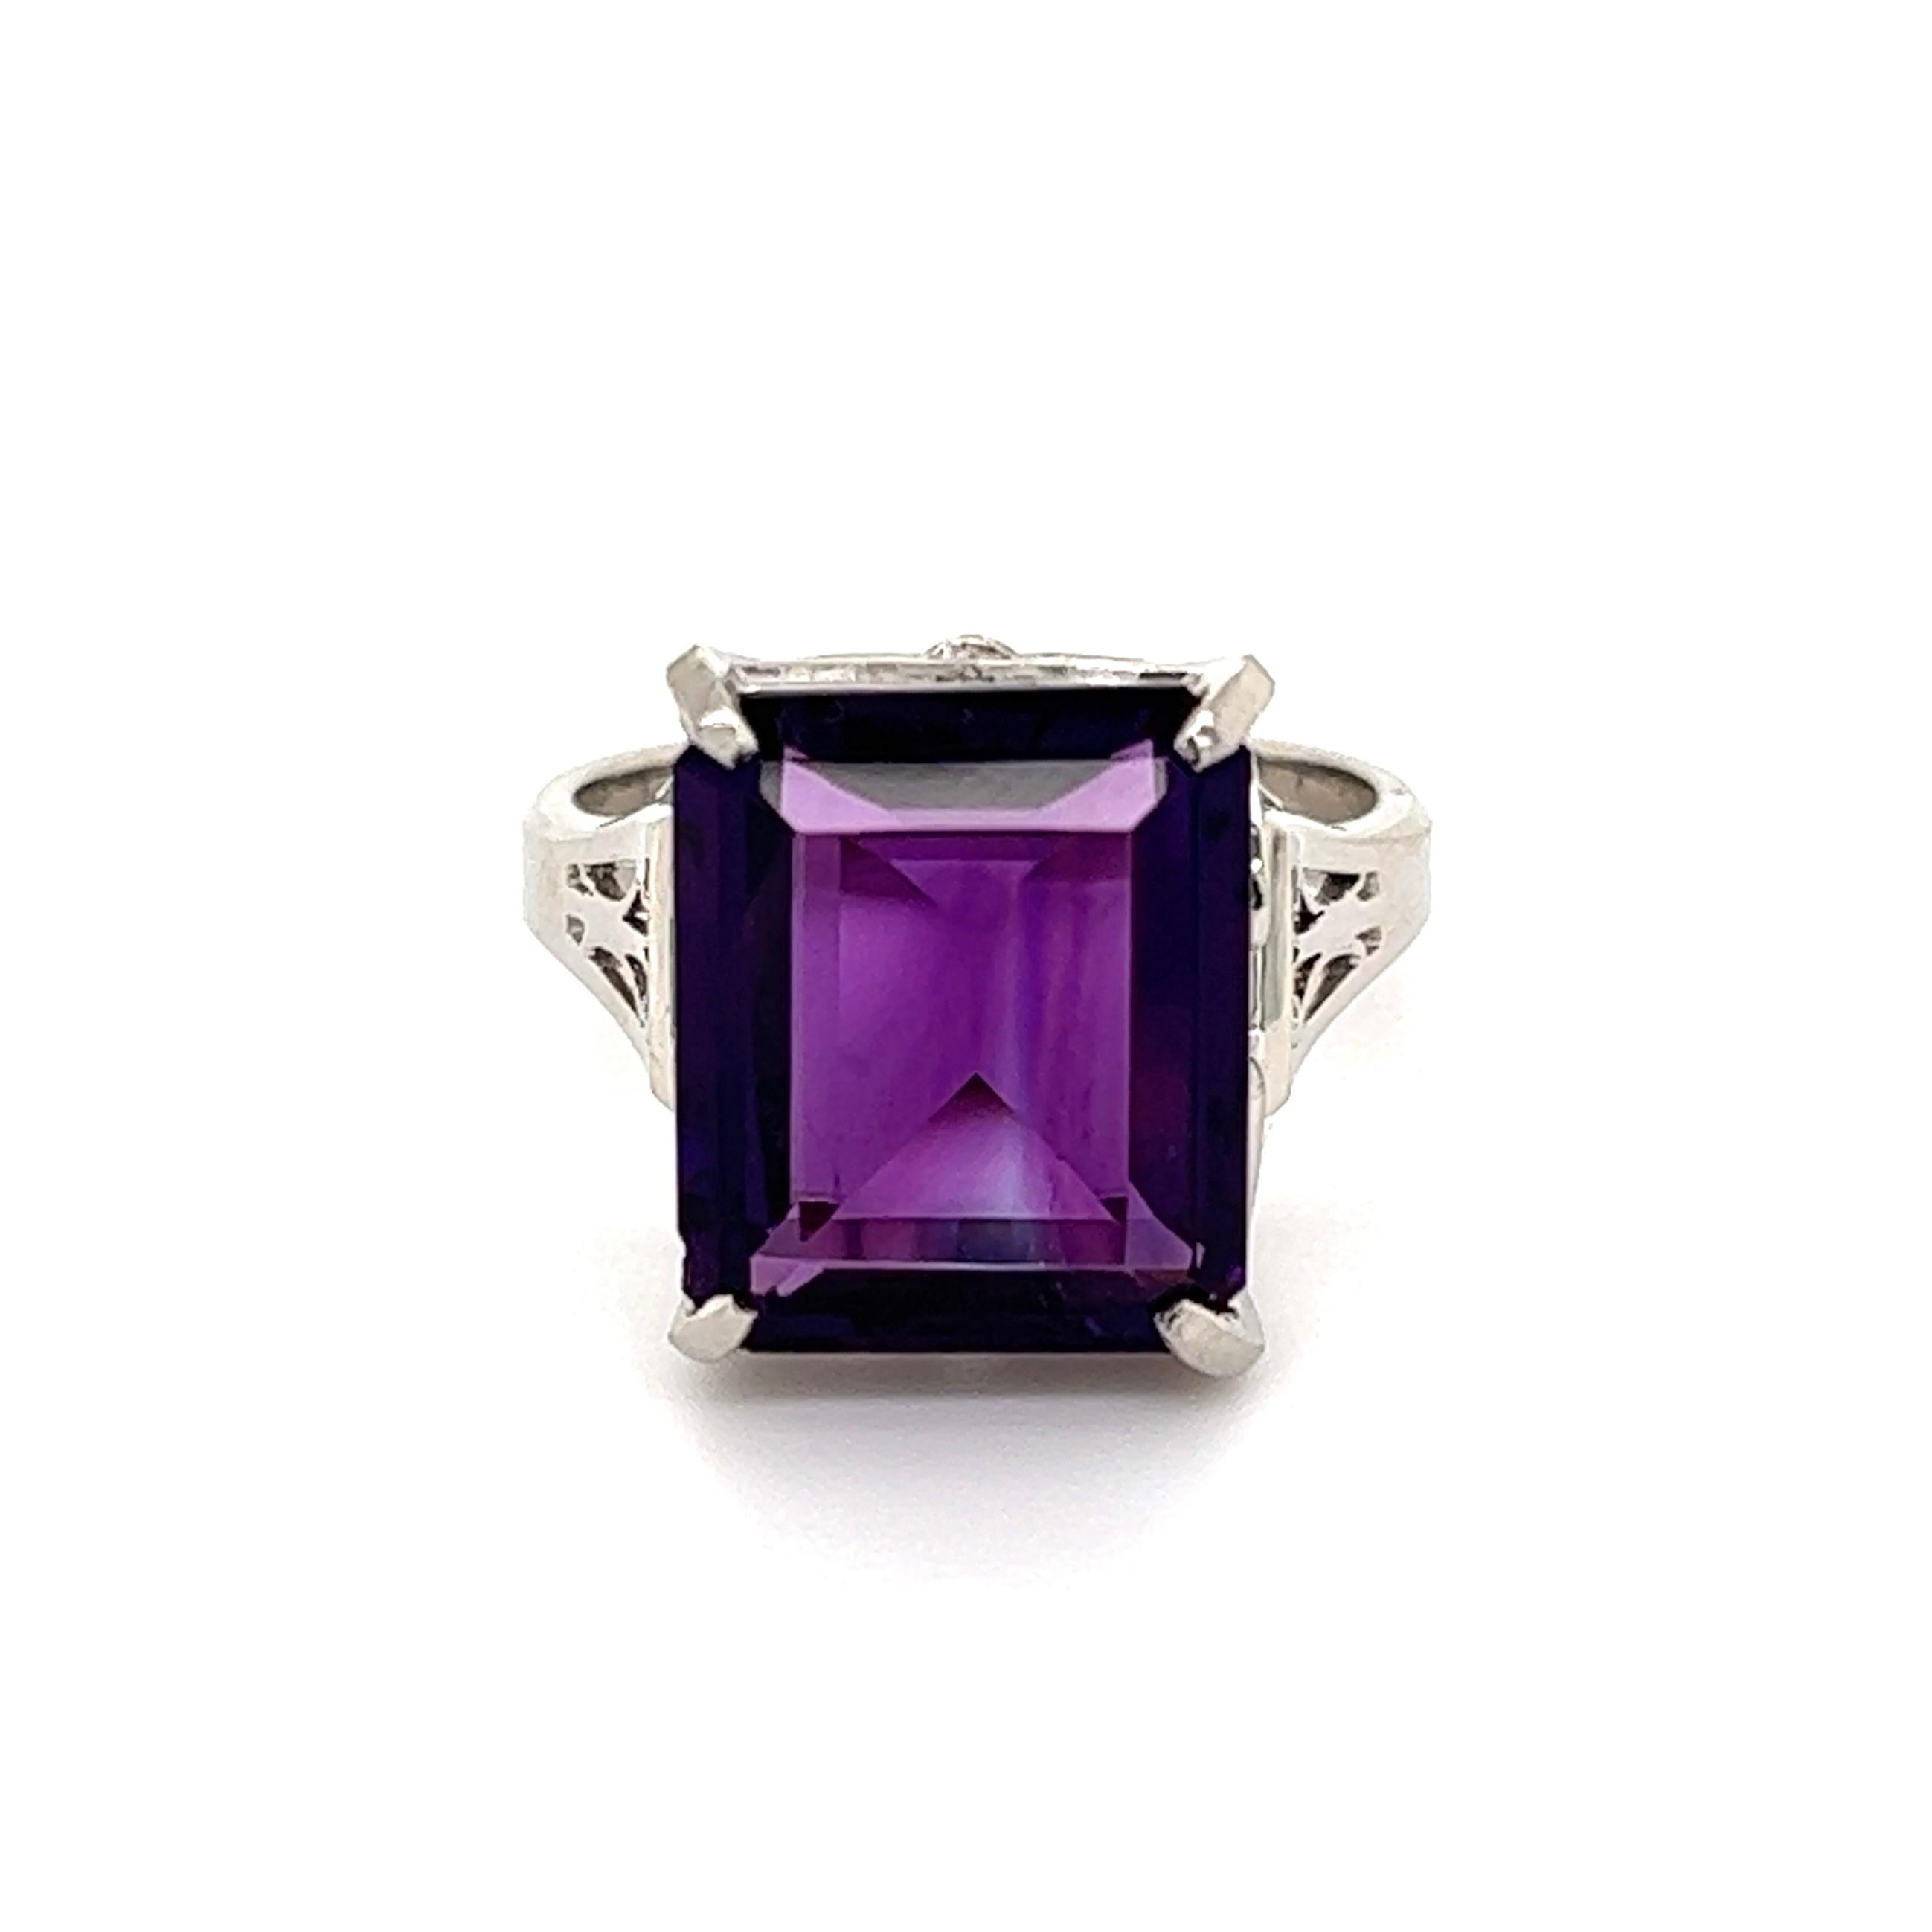 6.21 Carat Amethyst Platinum Retro Cocktail Ring In Excellent Condition For Sale In Montreal, QC